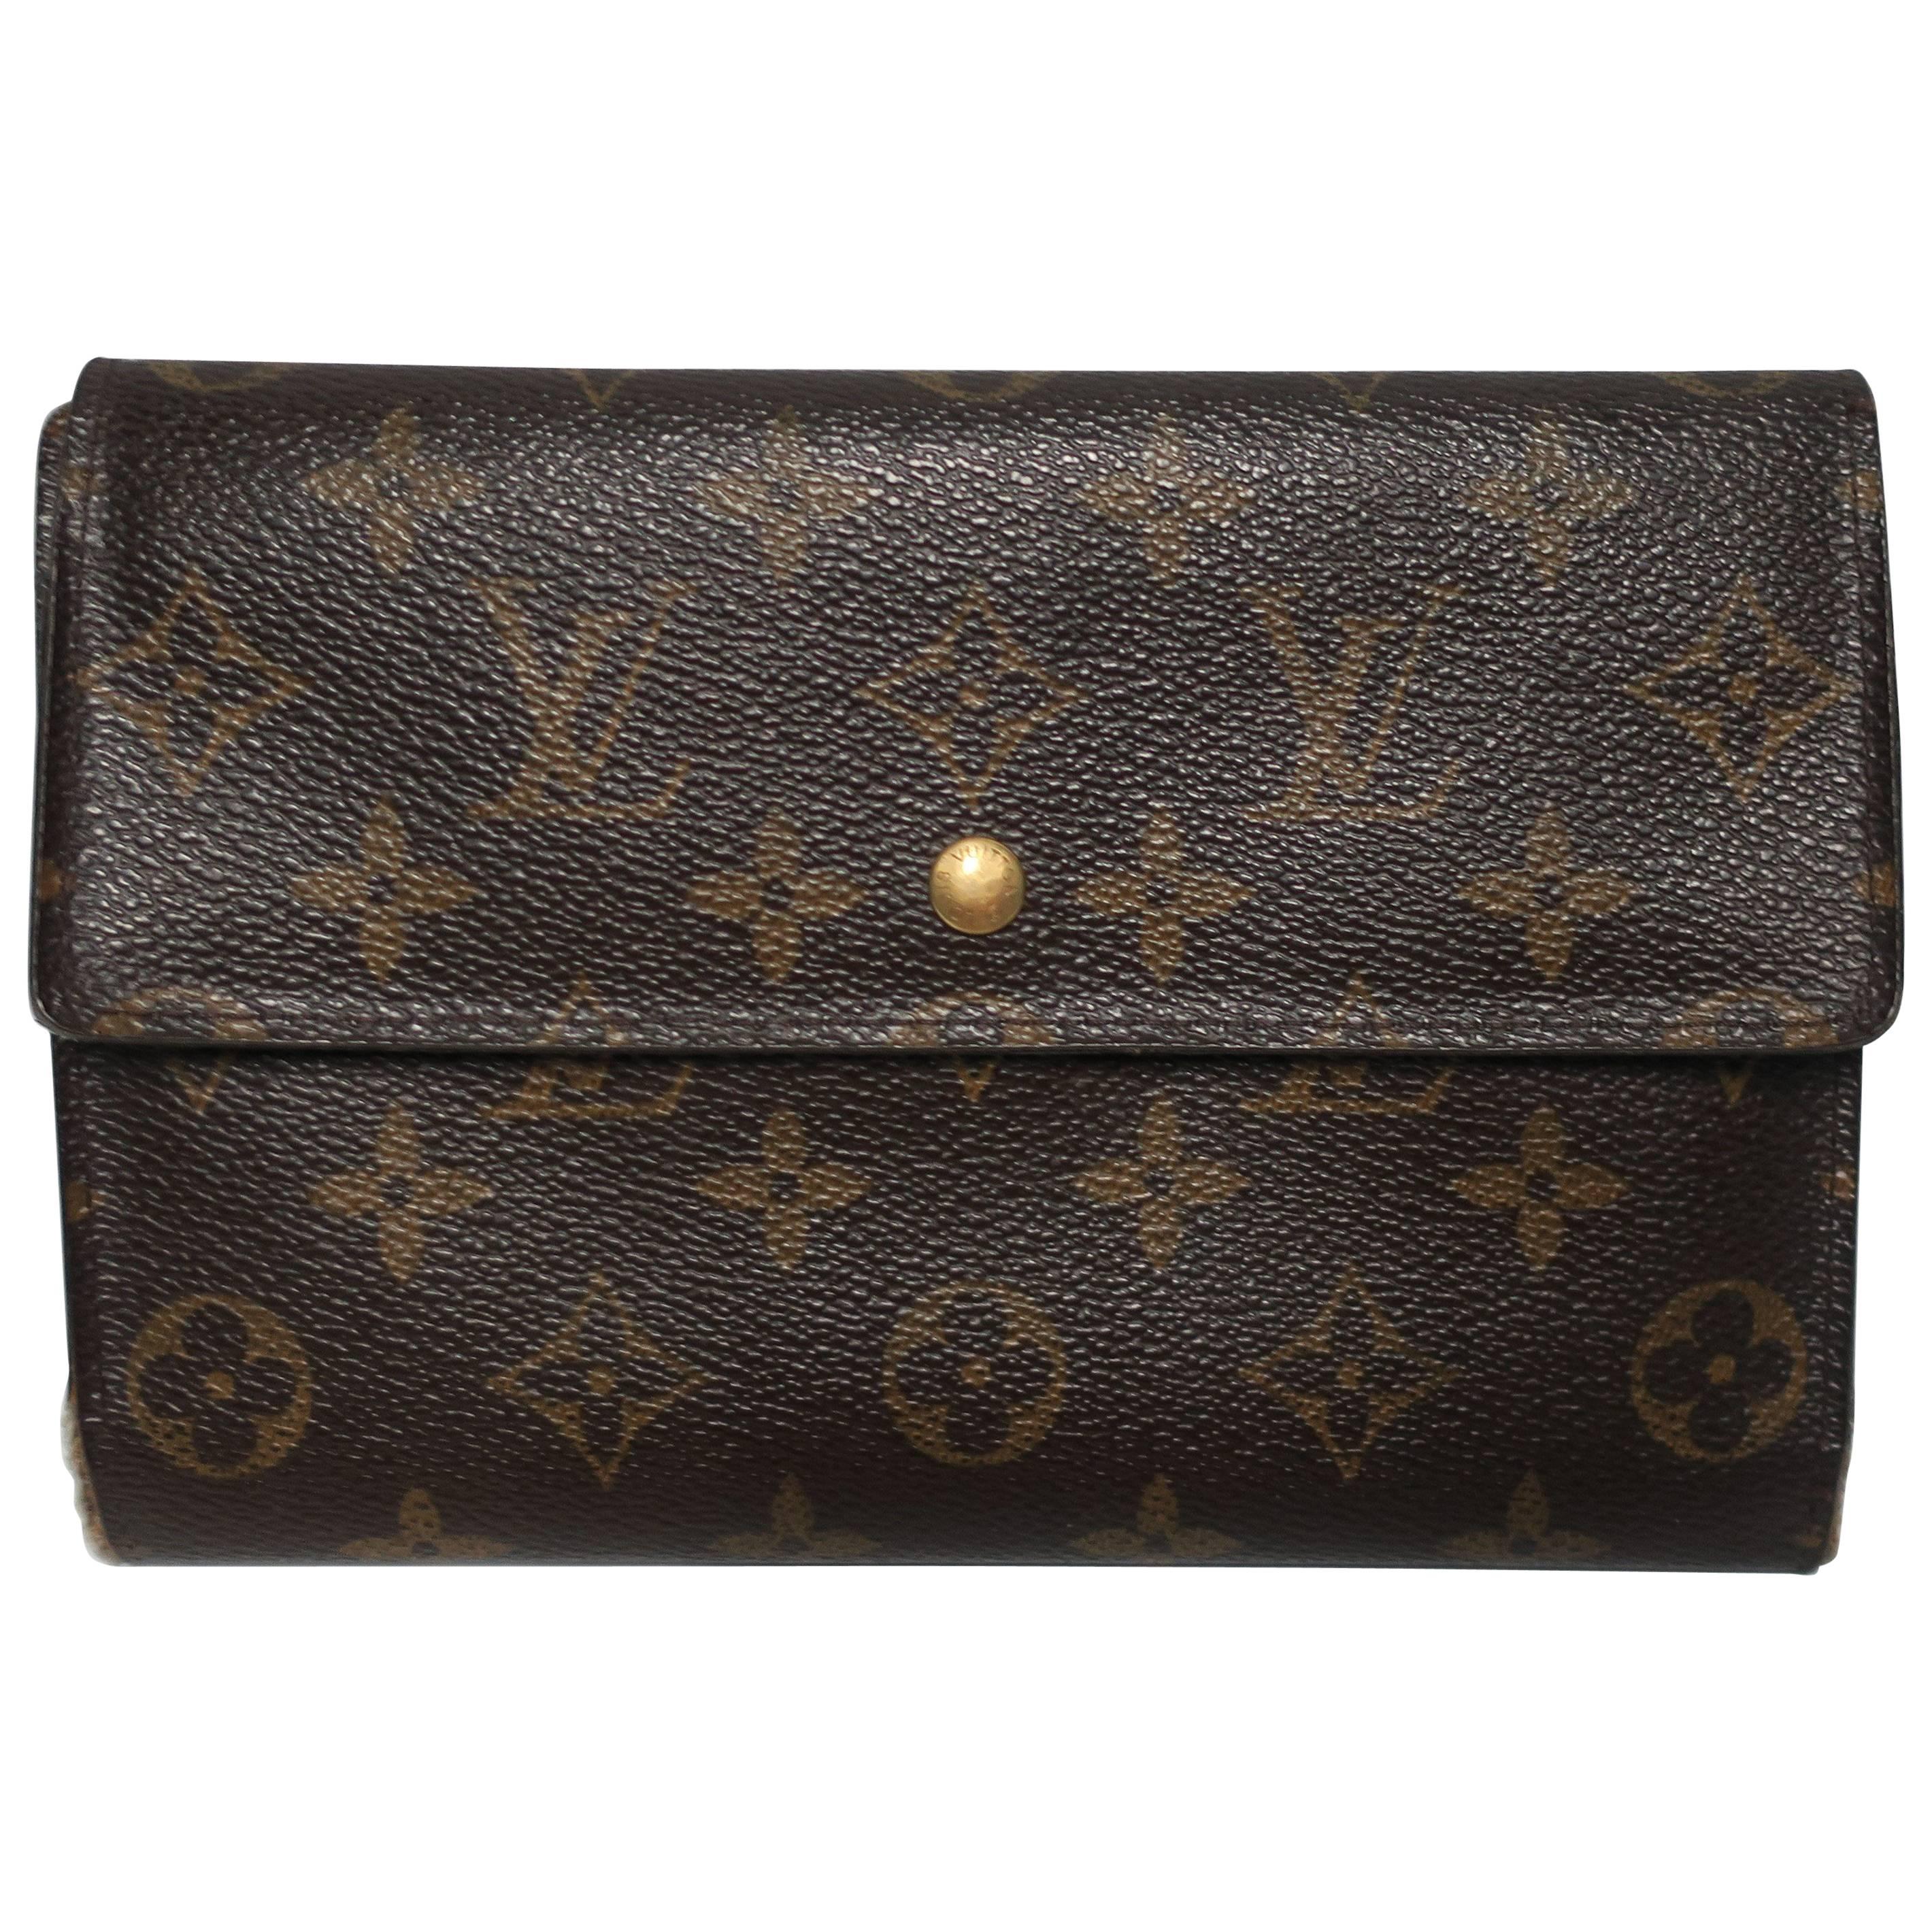 LV Louis Vuitton Wallet and Credit Card Holder Case, From France